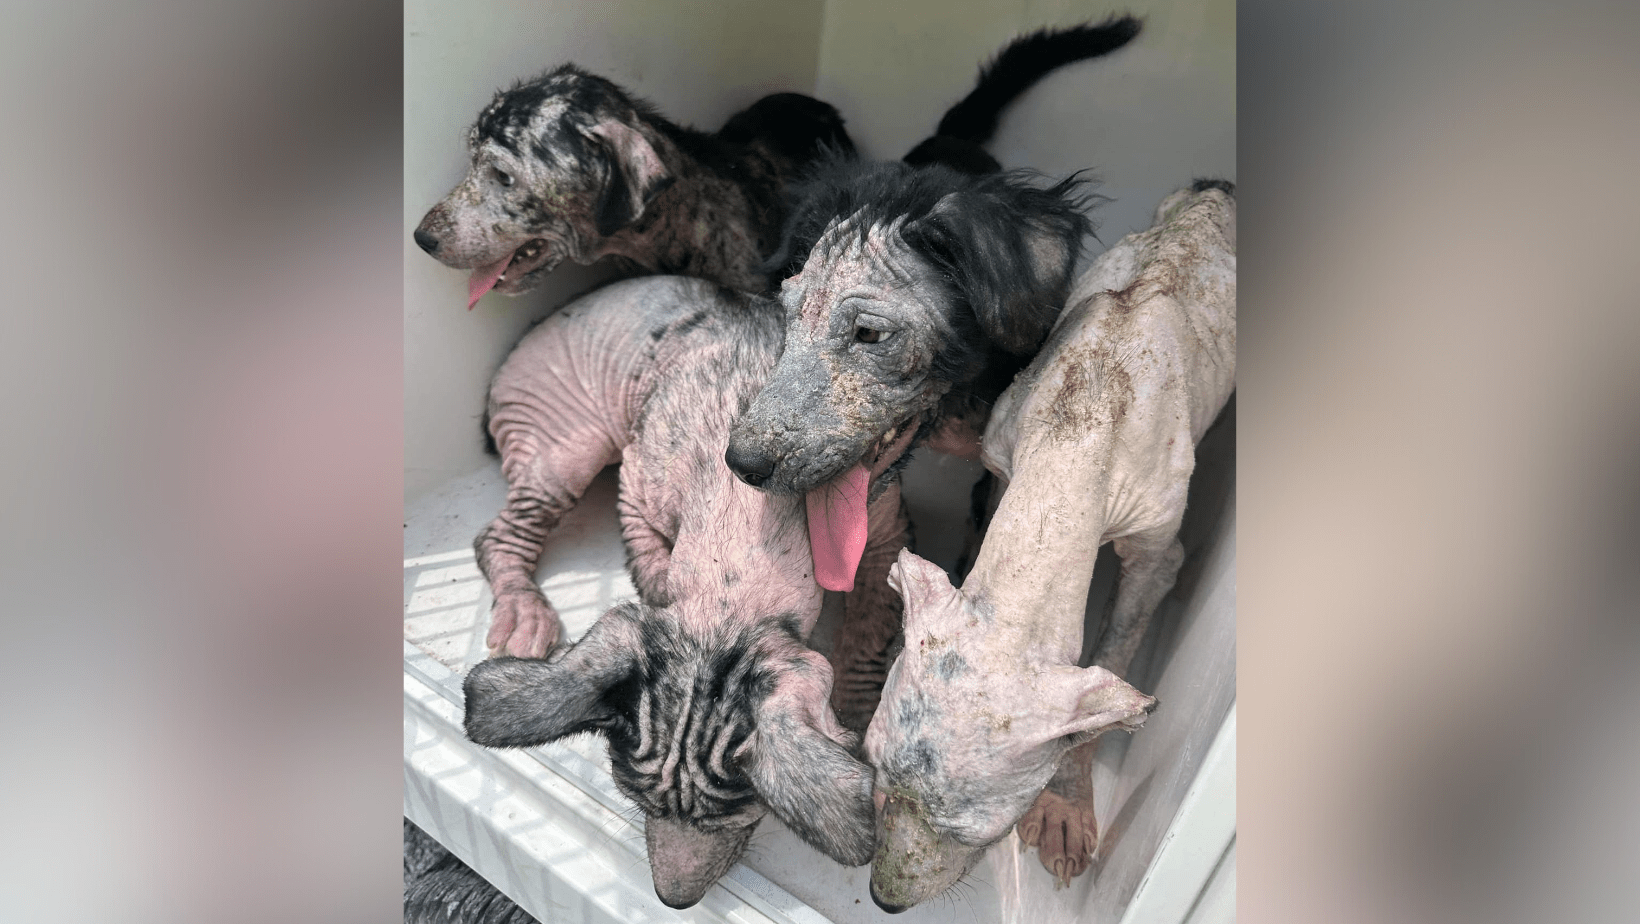 Dogs with mange and hookworms that were found in Mt. Clare. Credit: Harrison County Animal Control